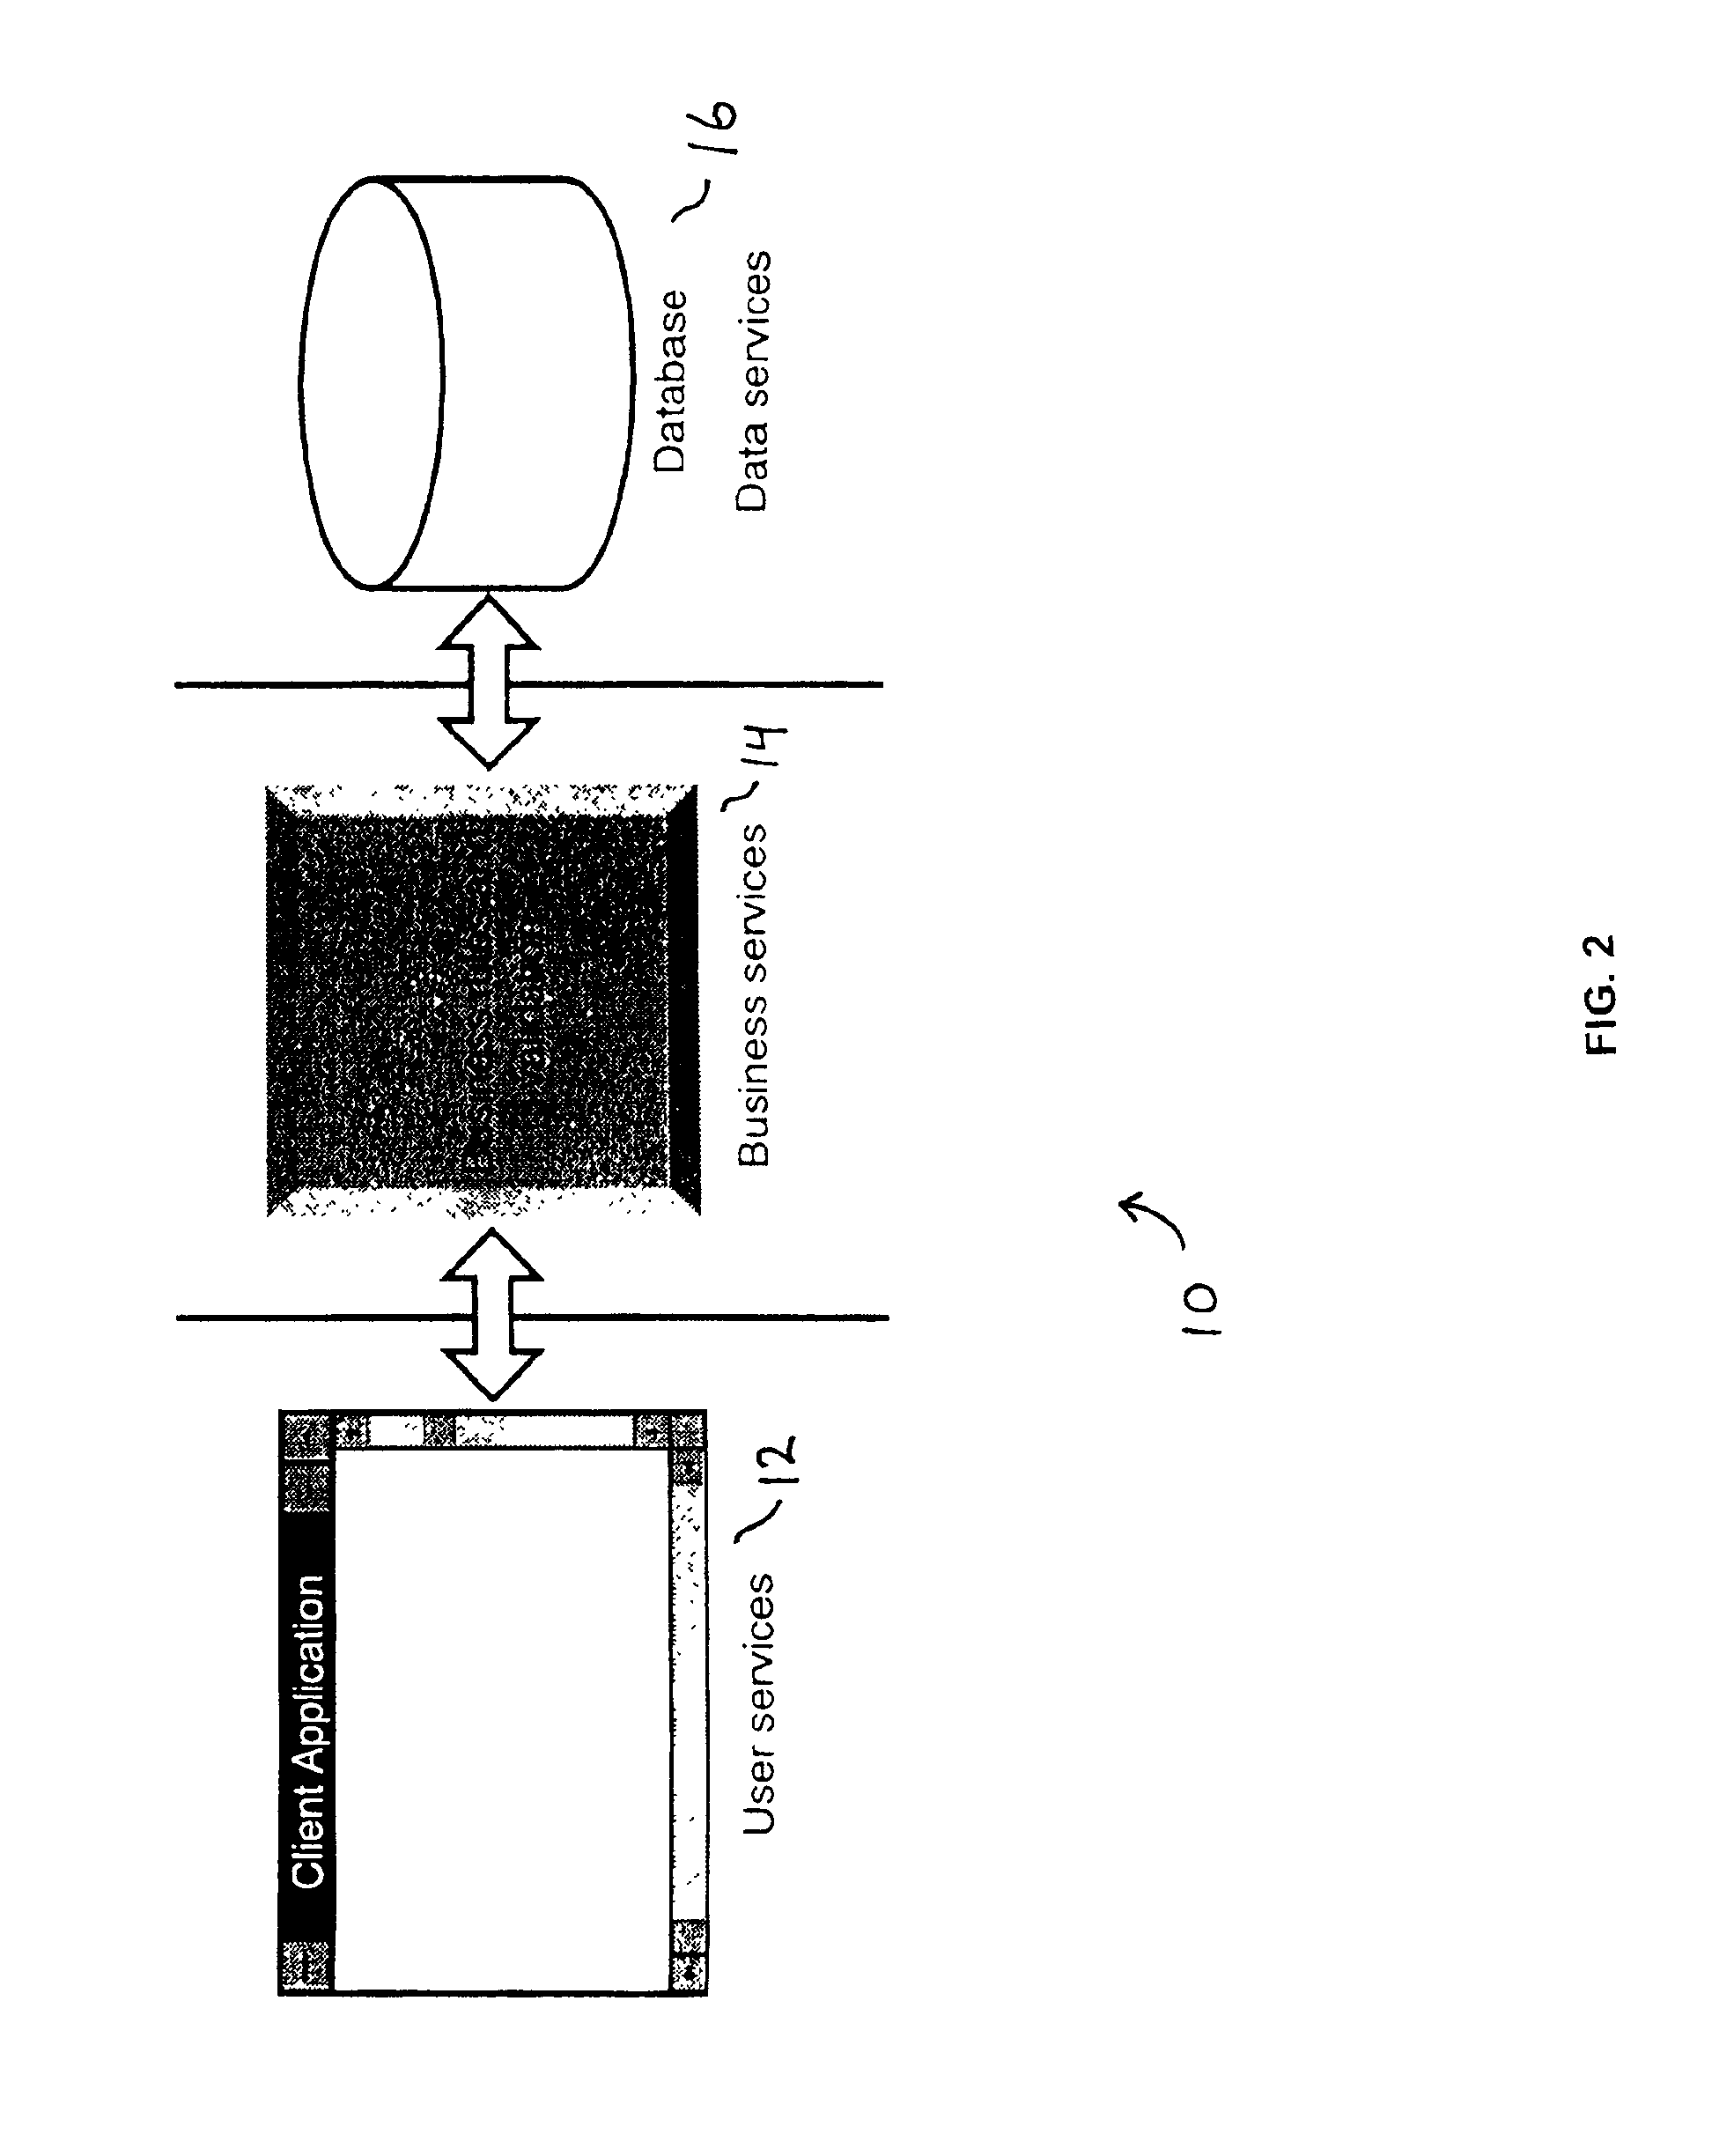 System, method and computer program product for optimization and acceleration of data transport and processing